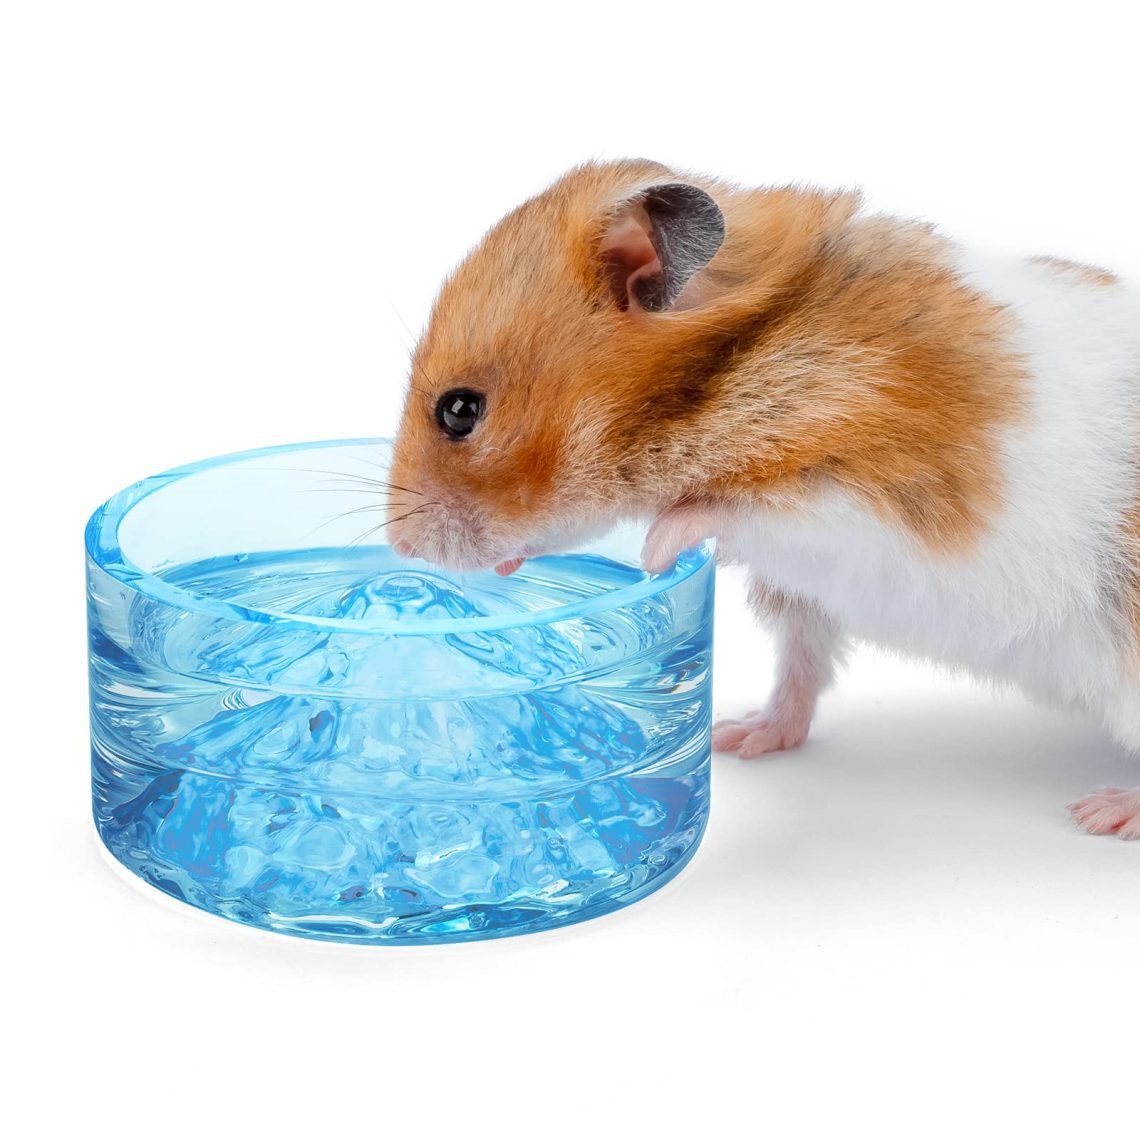 Drinking bowl for a hamster: how much it costs, types, methods of attachment